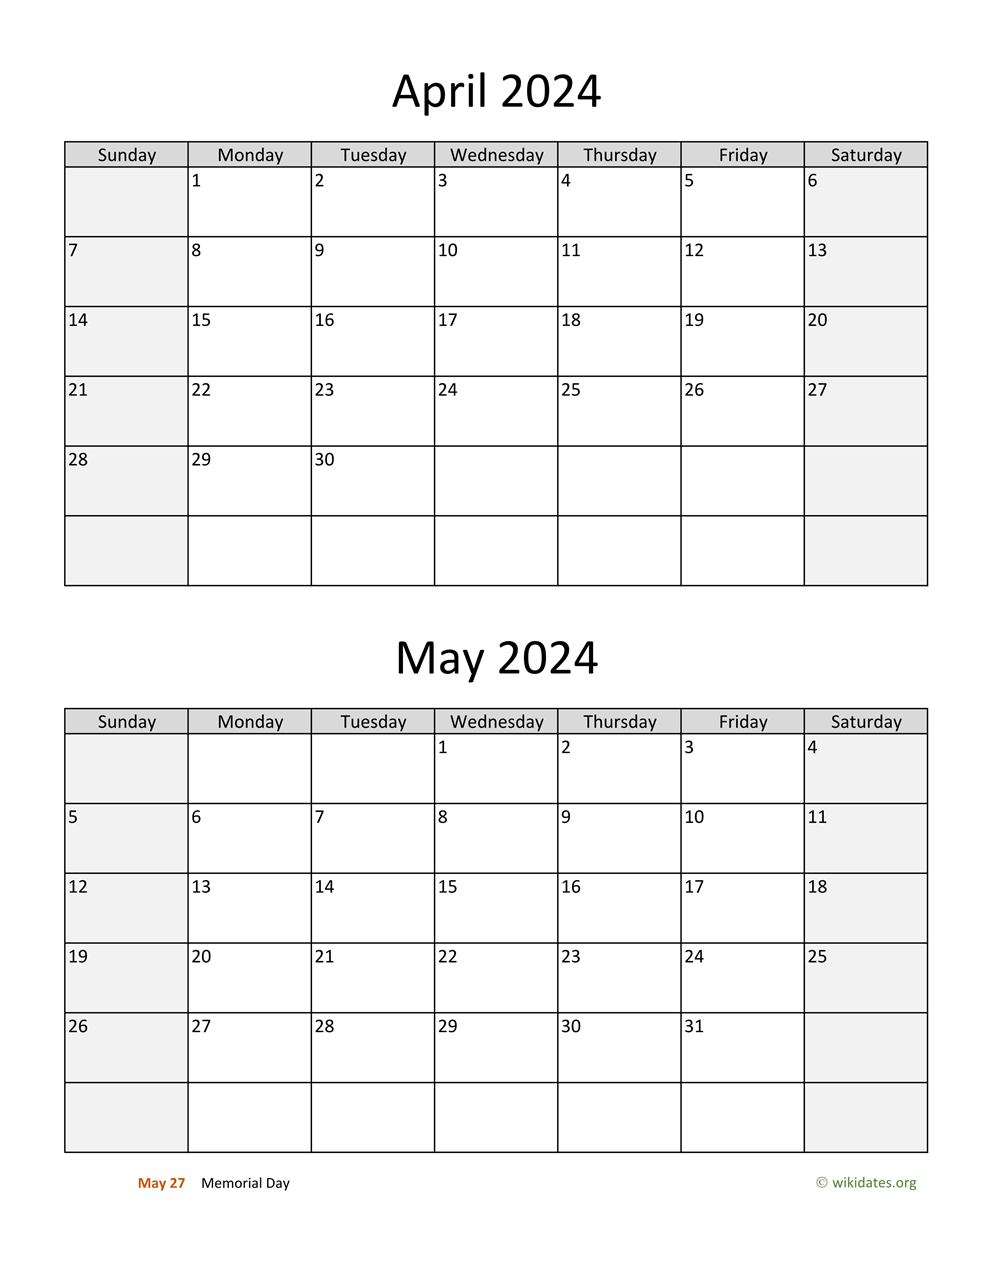 April And May 2024 Calendar | Wikidates for April And May 2024 Calendar Printable